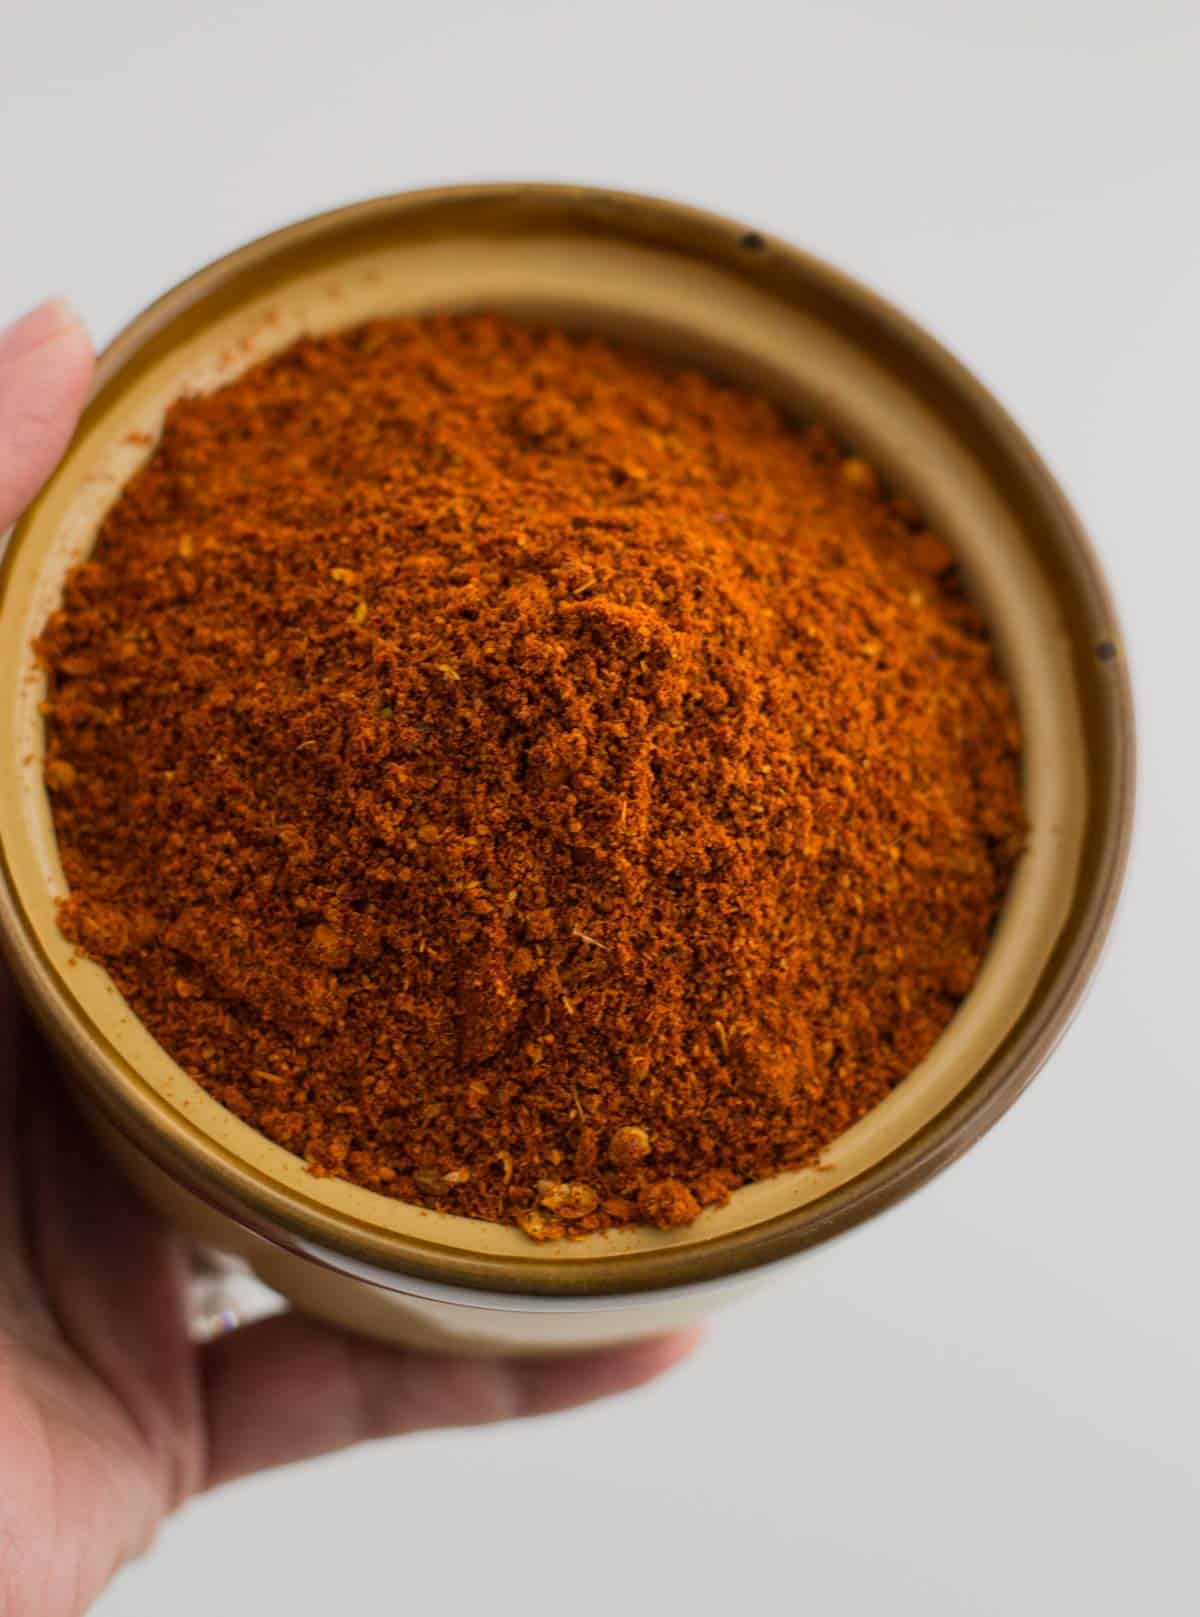 Cut your cooking time for Mangalorean dishes substantially by making this easy Bunts Style Kundapur Masala Powder ahead of time. This spice mix is what most Mangaloreans use for their vegetarian as well as non-vegetarian dishes.